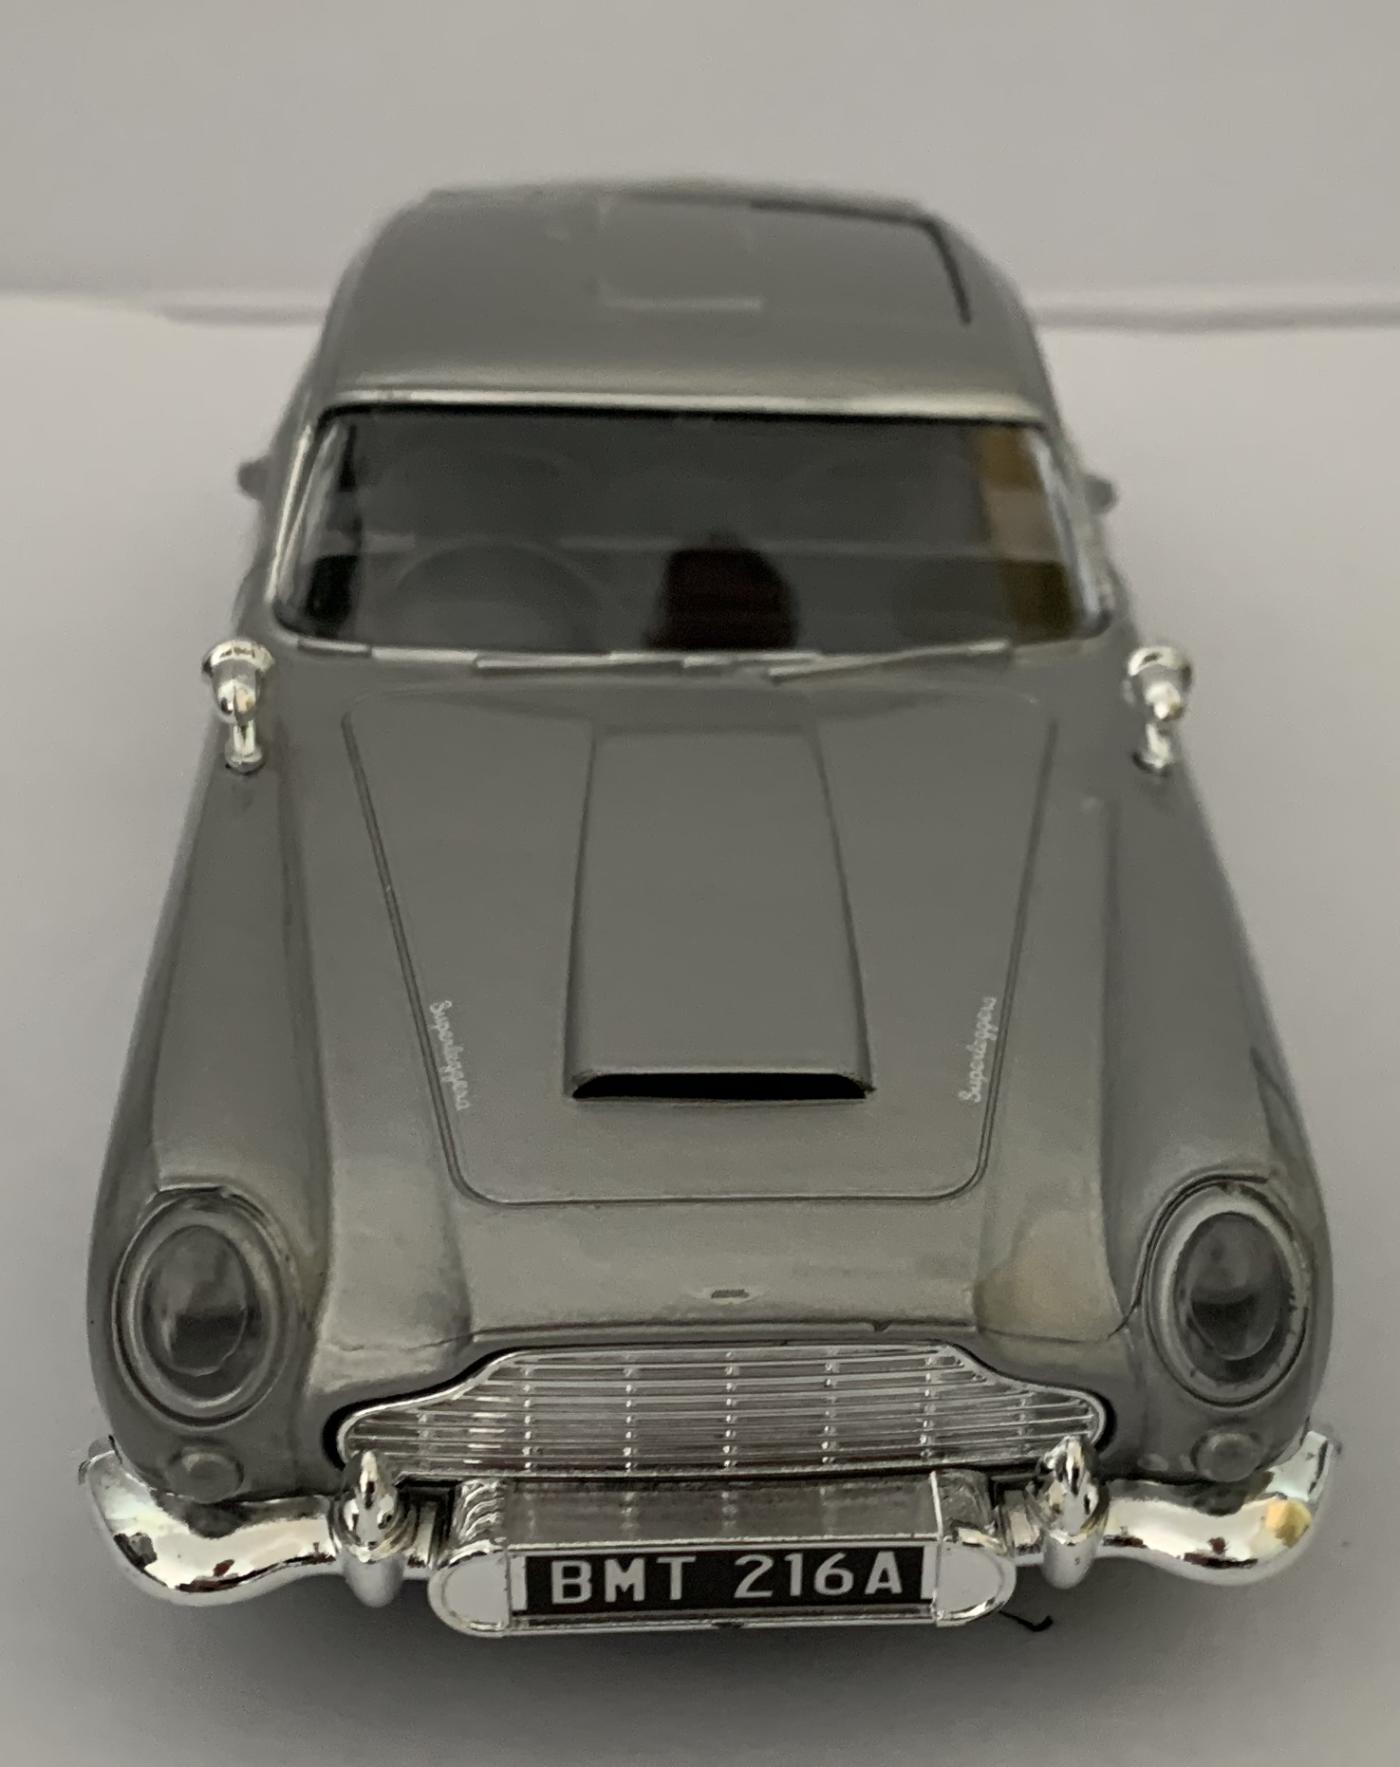 An excellent scale model of an Aston Martin in silver with side air vents and wired chrome wheels.